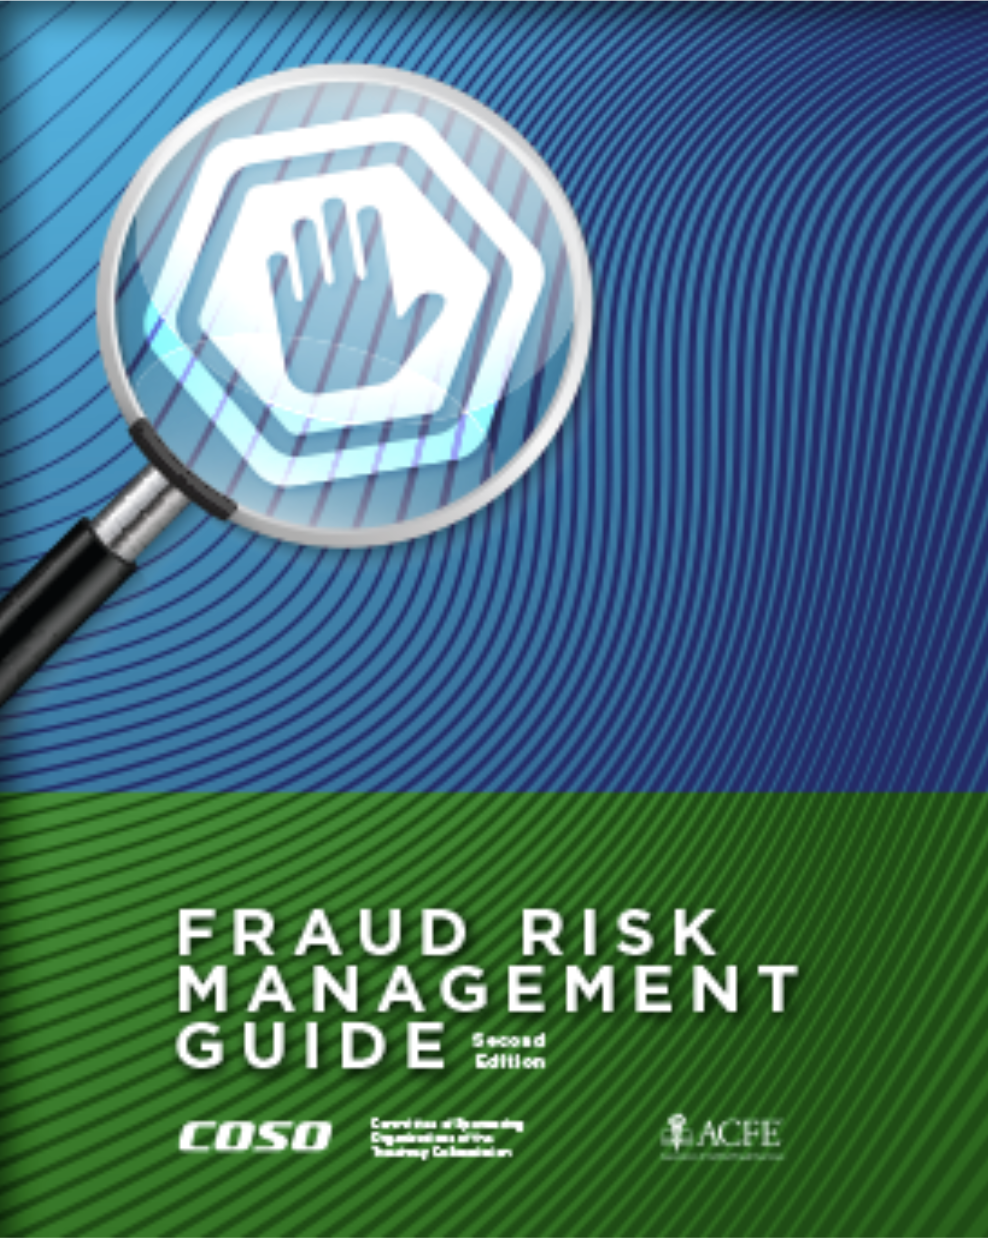 What’s New in the Second Edition of the ACFE/COSO Fraud Risk Management